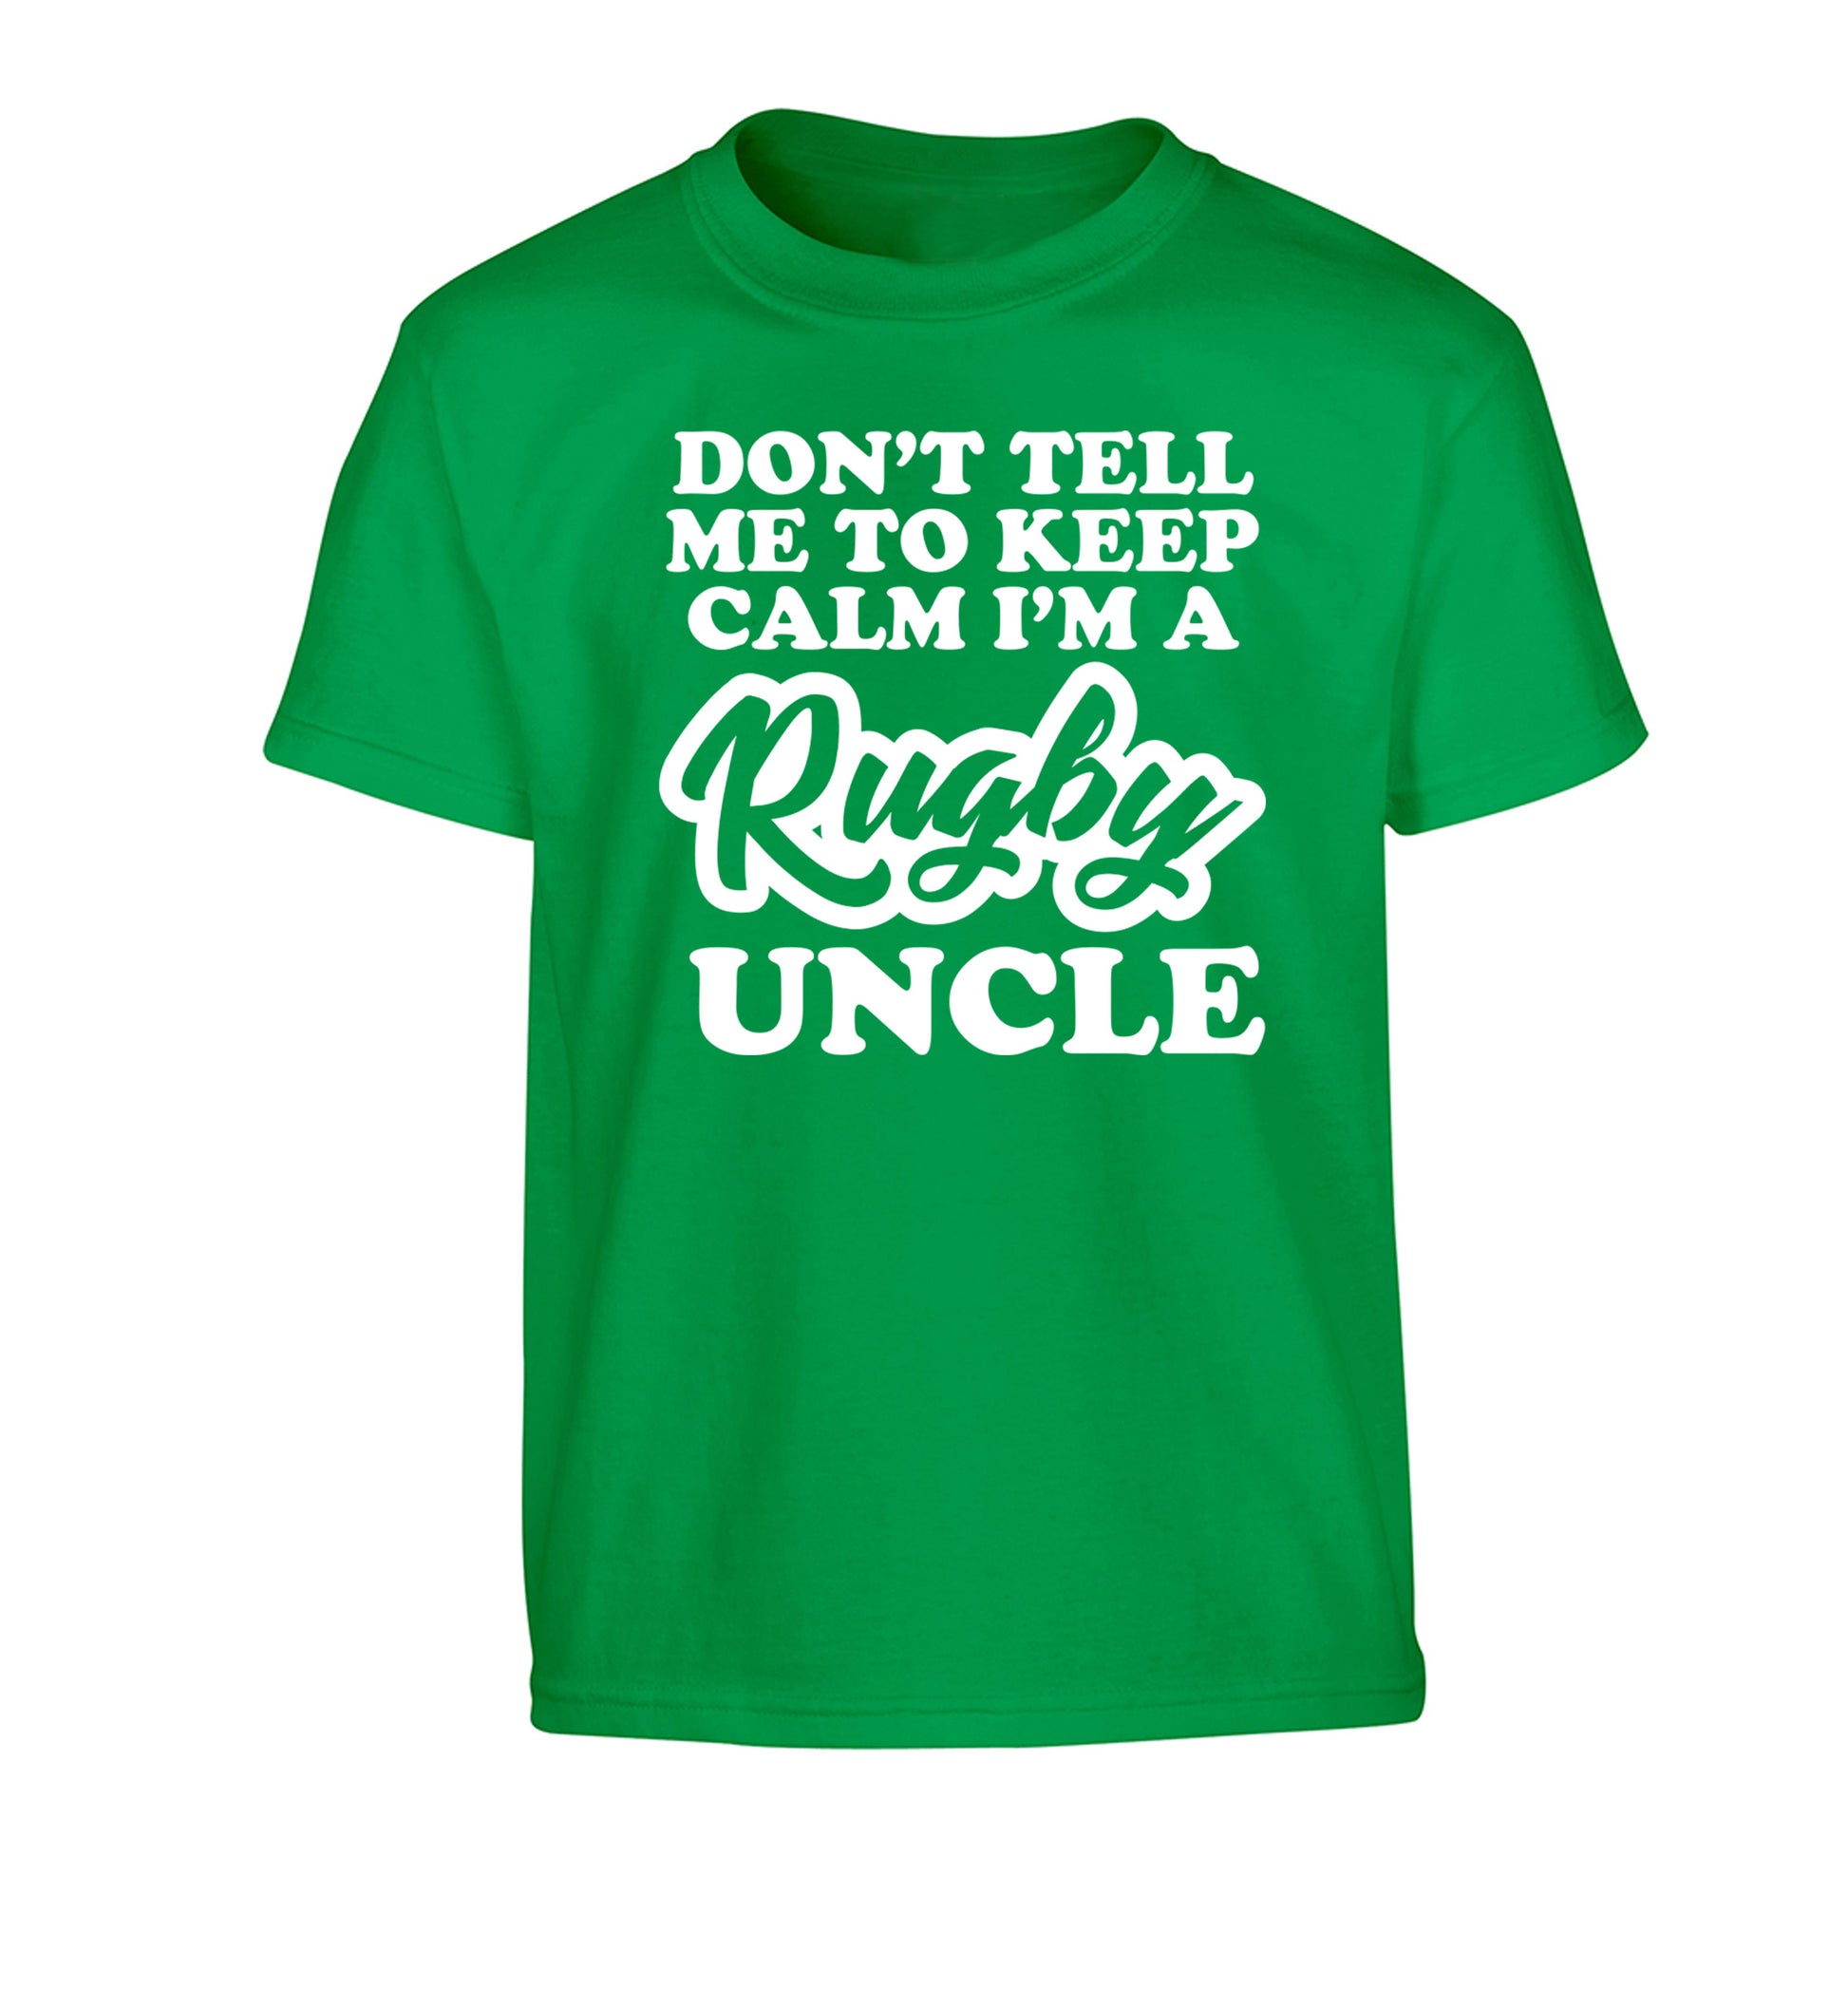 Don't tell me to keep calm I'm a rugby uncle Children's green Tshirt 12-13 Years